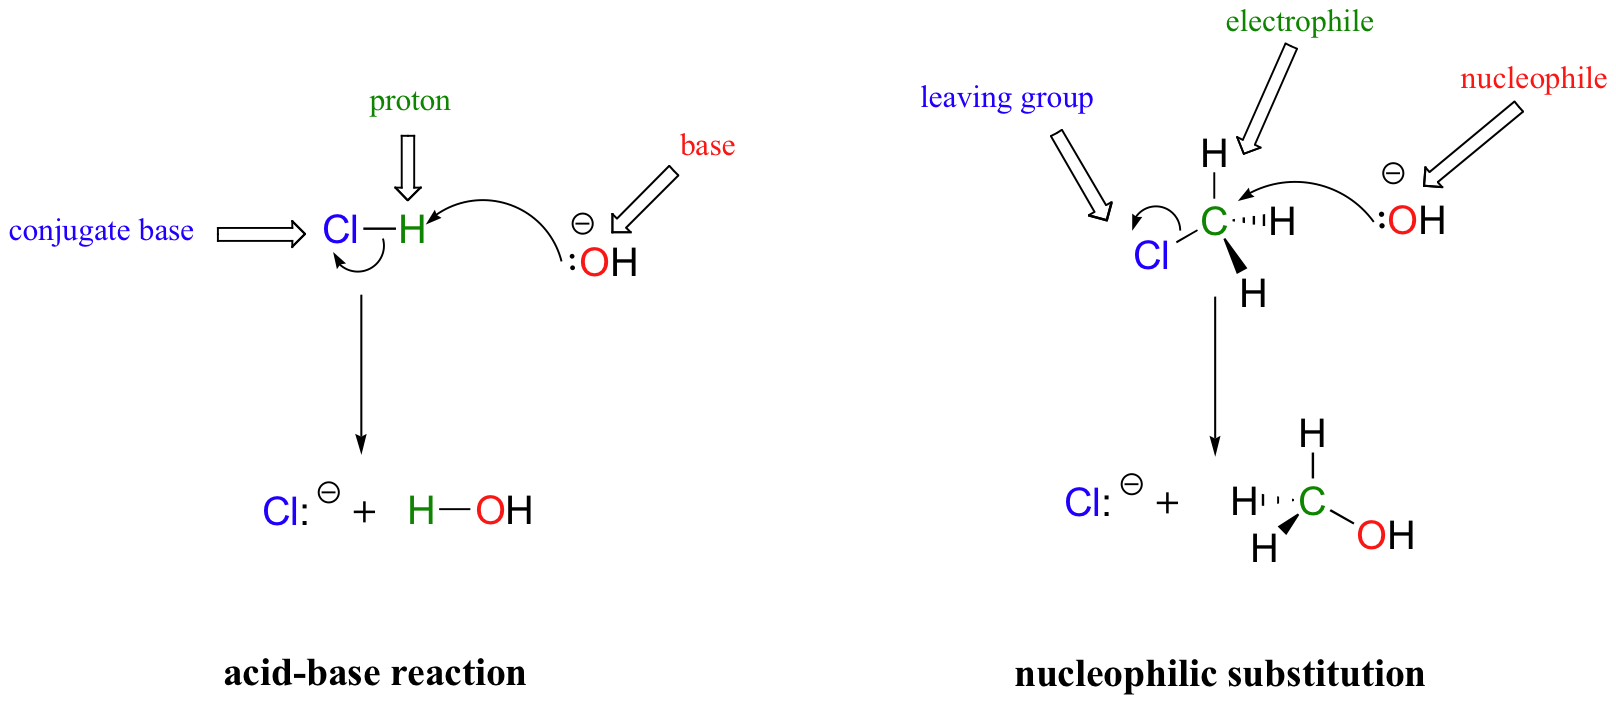 Acid base reaction with the conjugate base in blue, the proton in green and the base in red. Nucleophilic substitution reaction with the leaving group in blue, electrophile in green and nucleophile in red. 